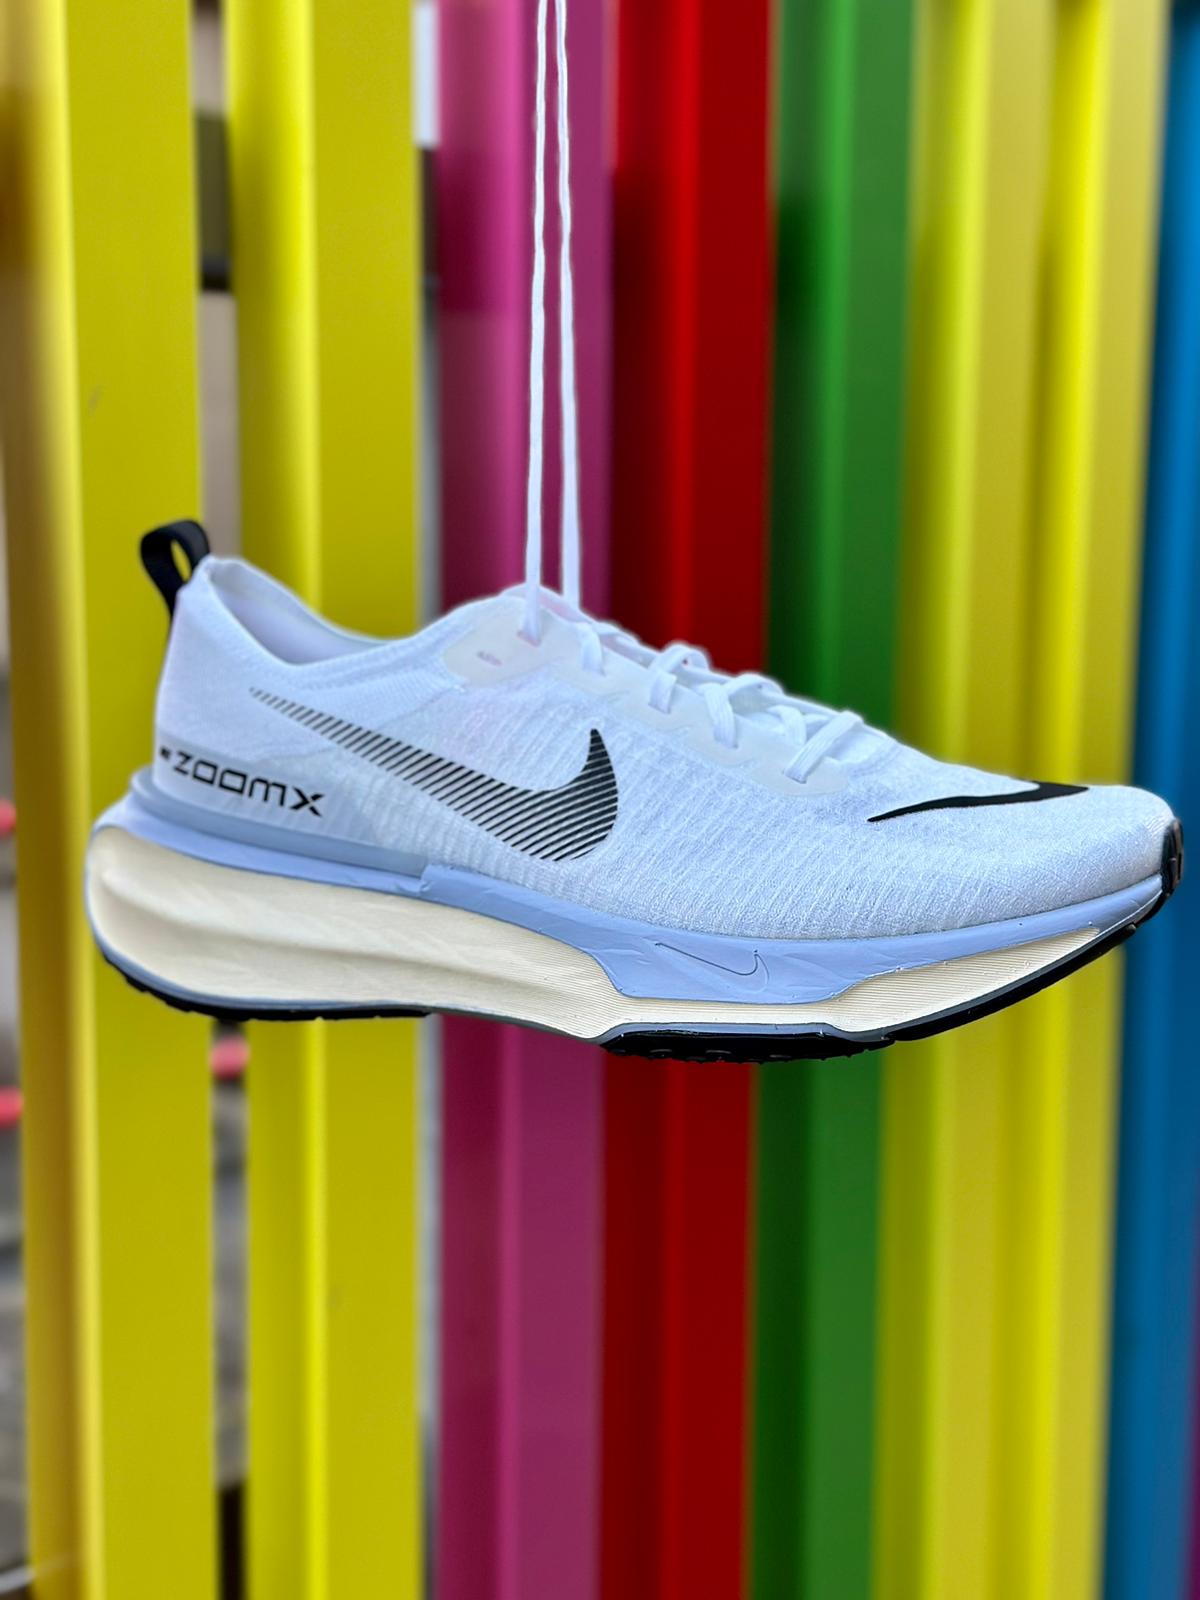 Nike ZoomX Invincible Run Flyknit 3 Review